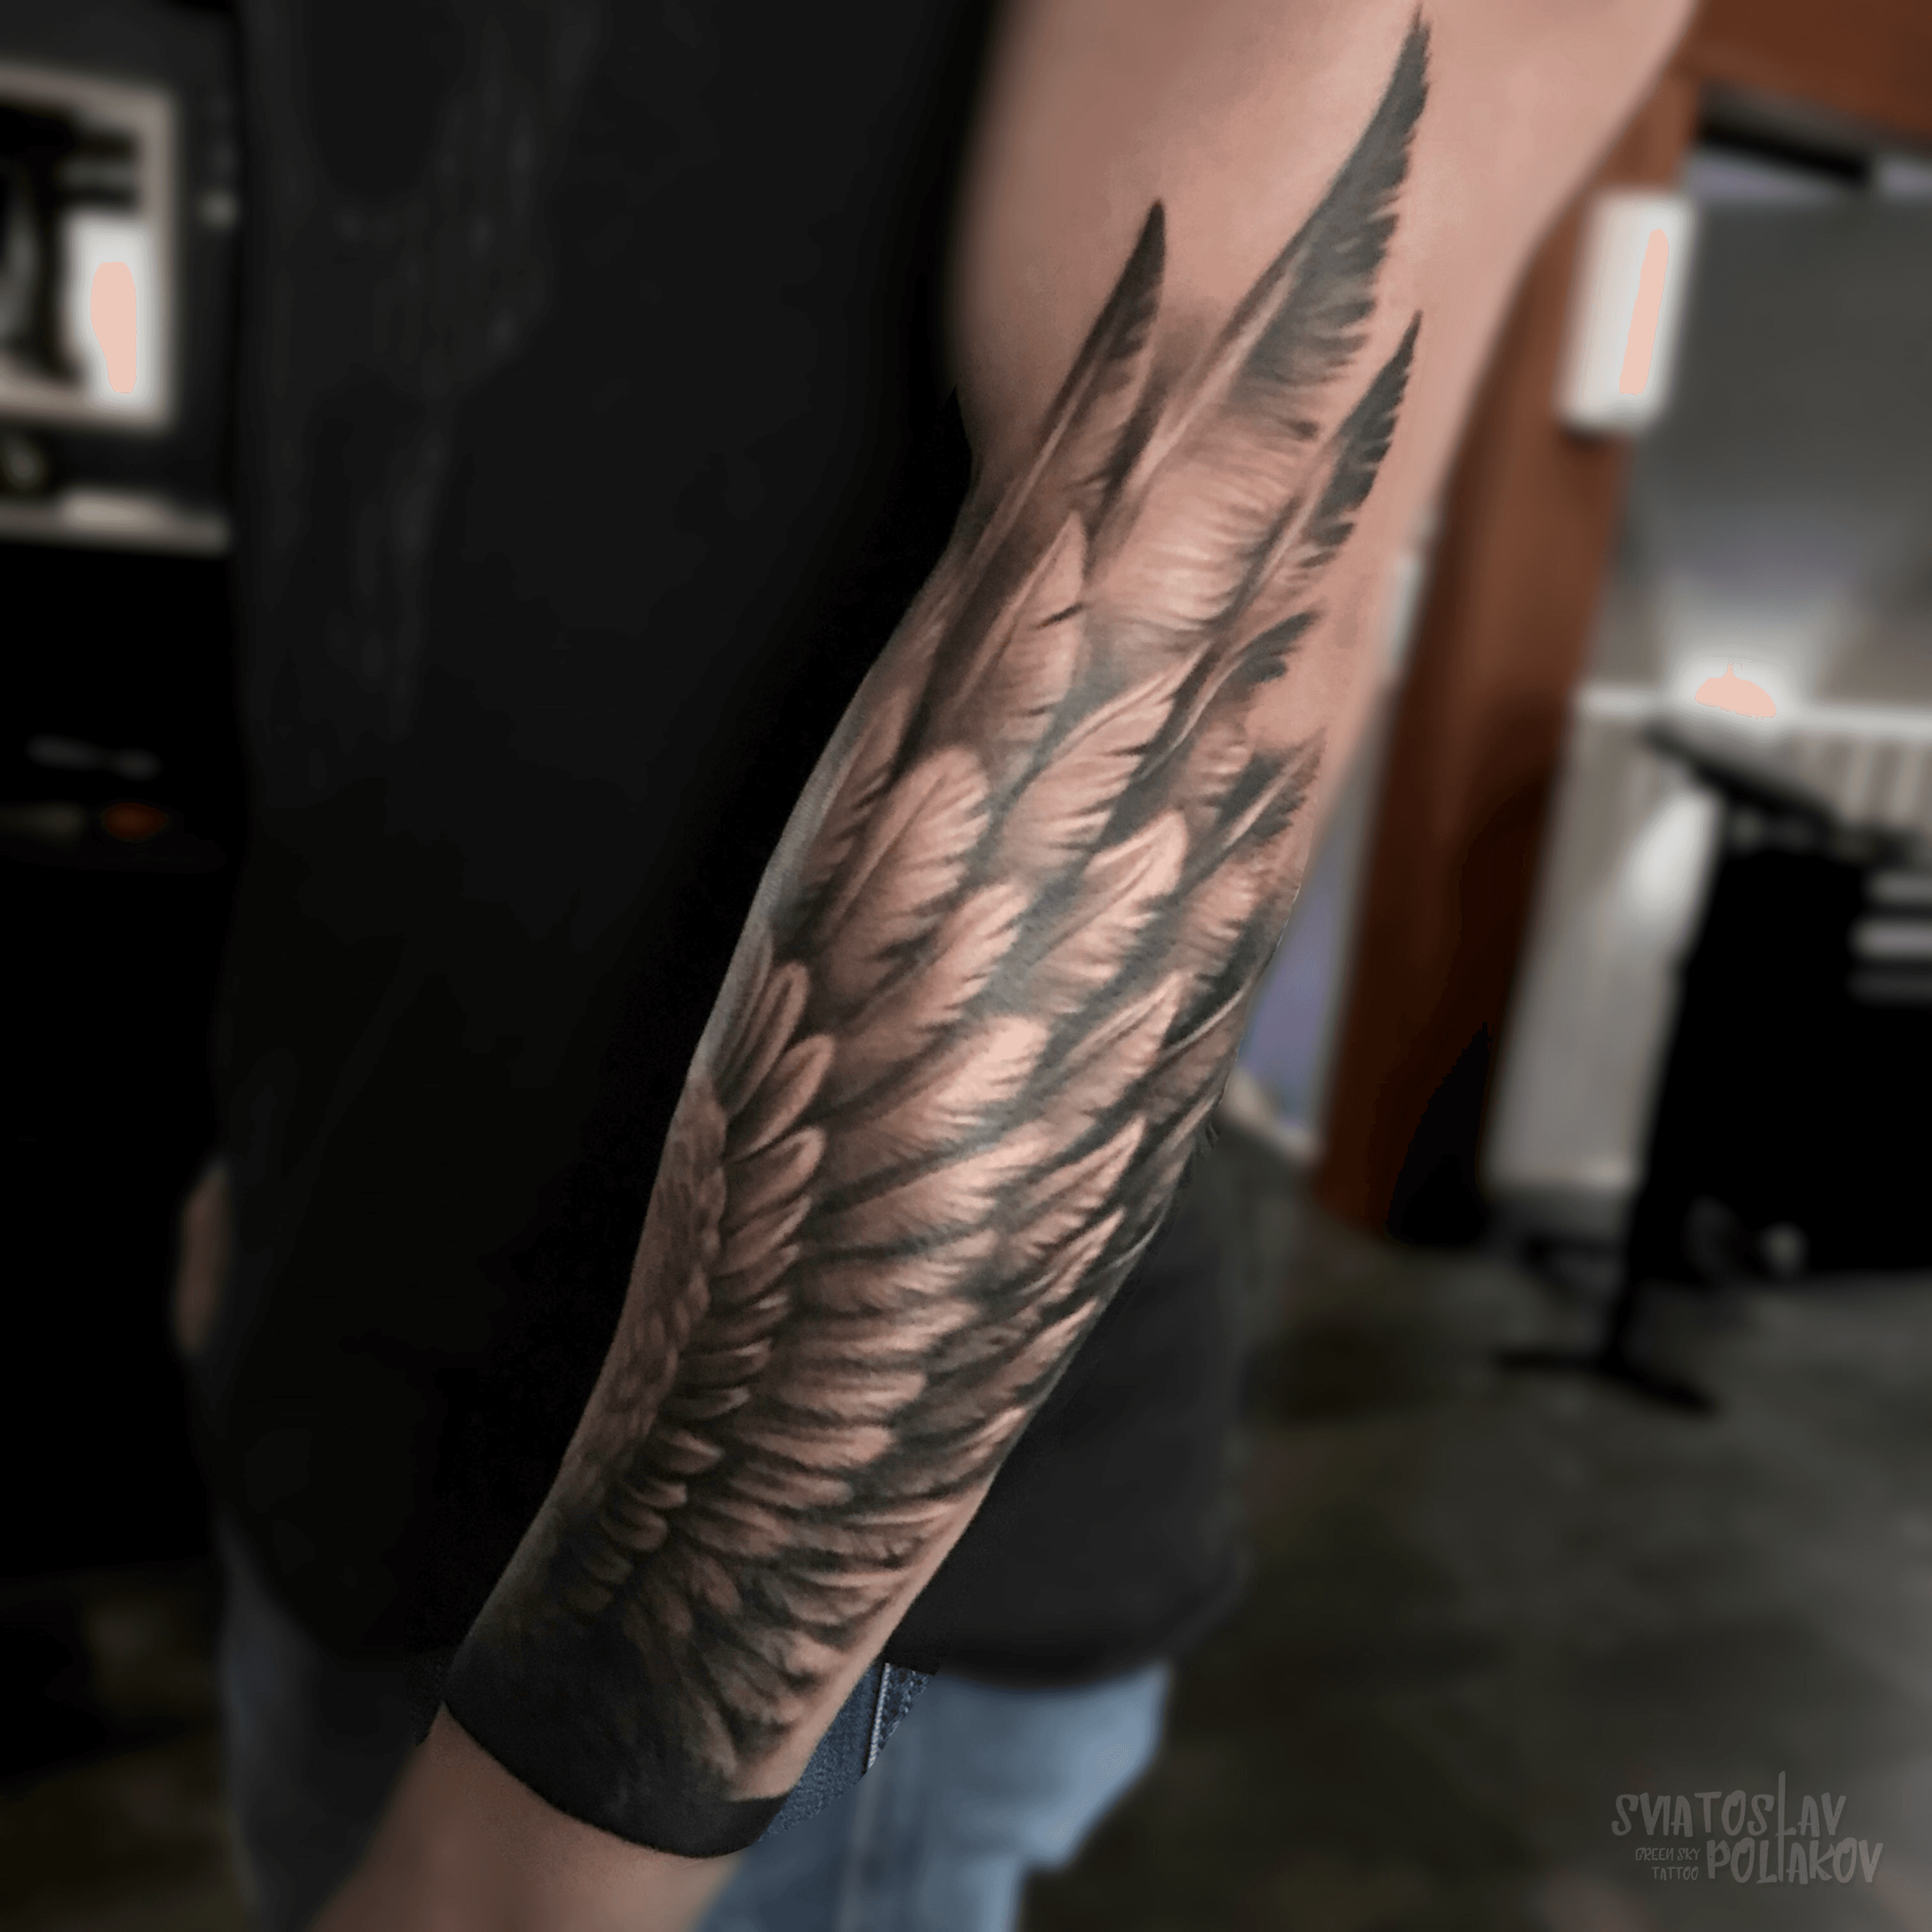 Forearm tattoo of a wing